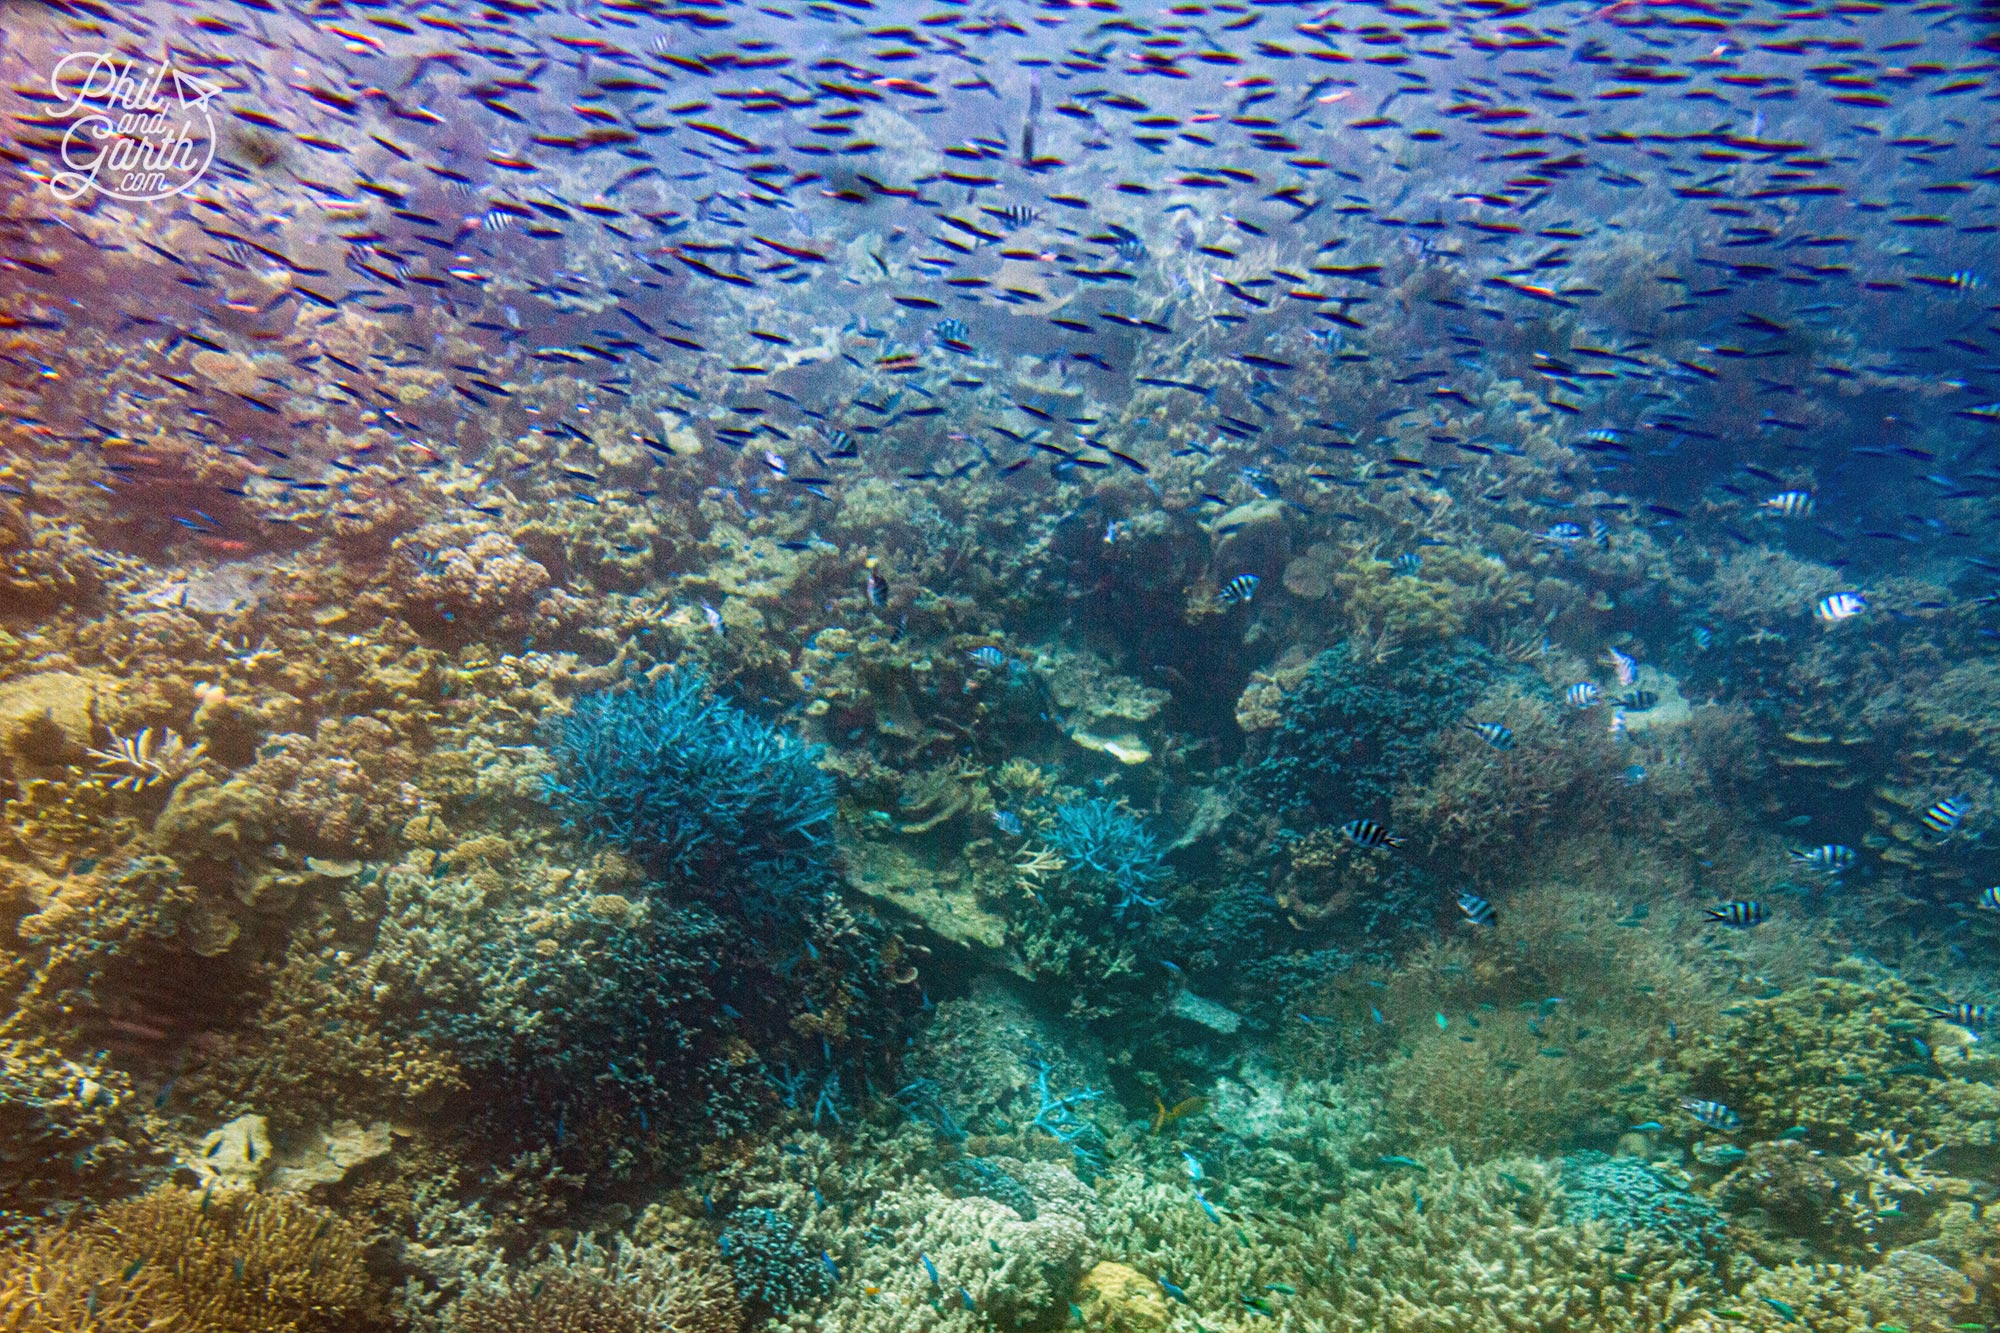 The living coral thrives in water that are low in nutrients